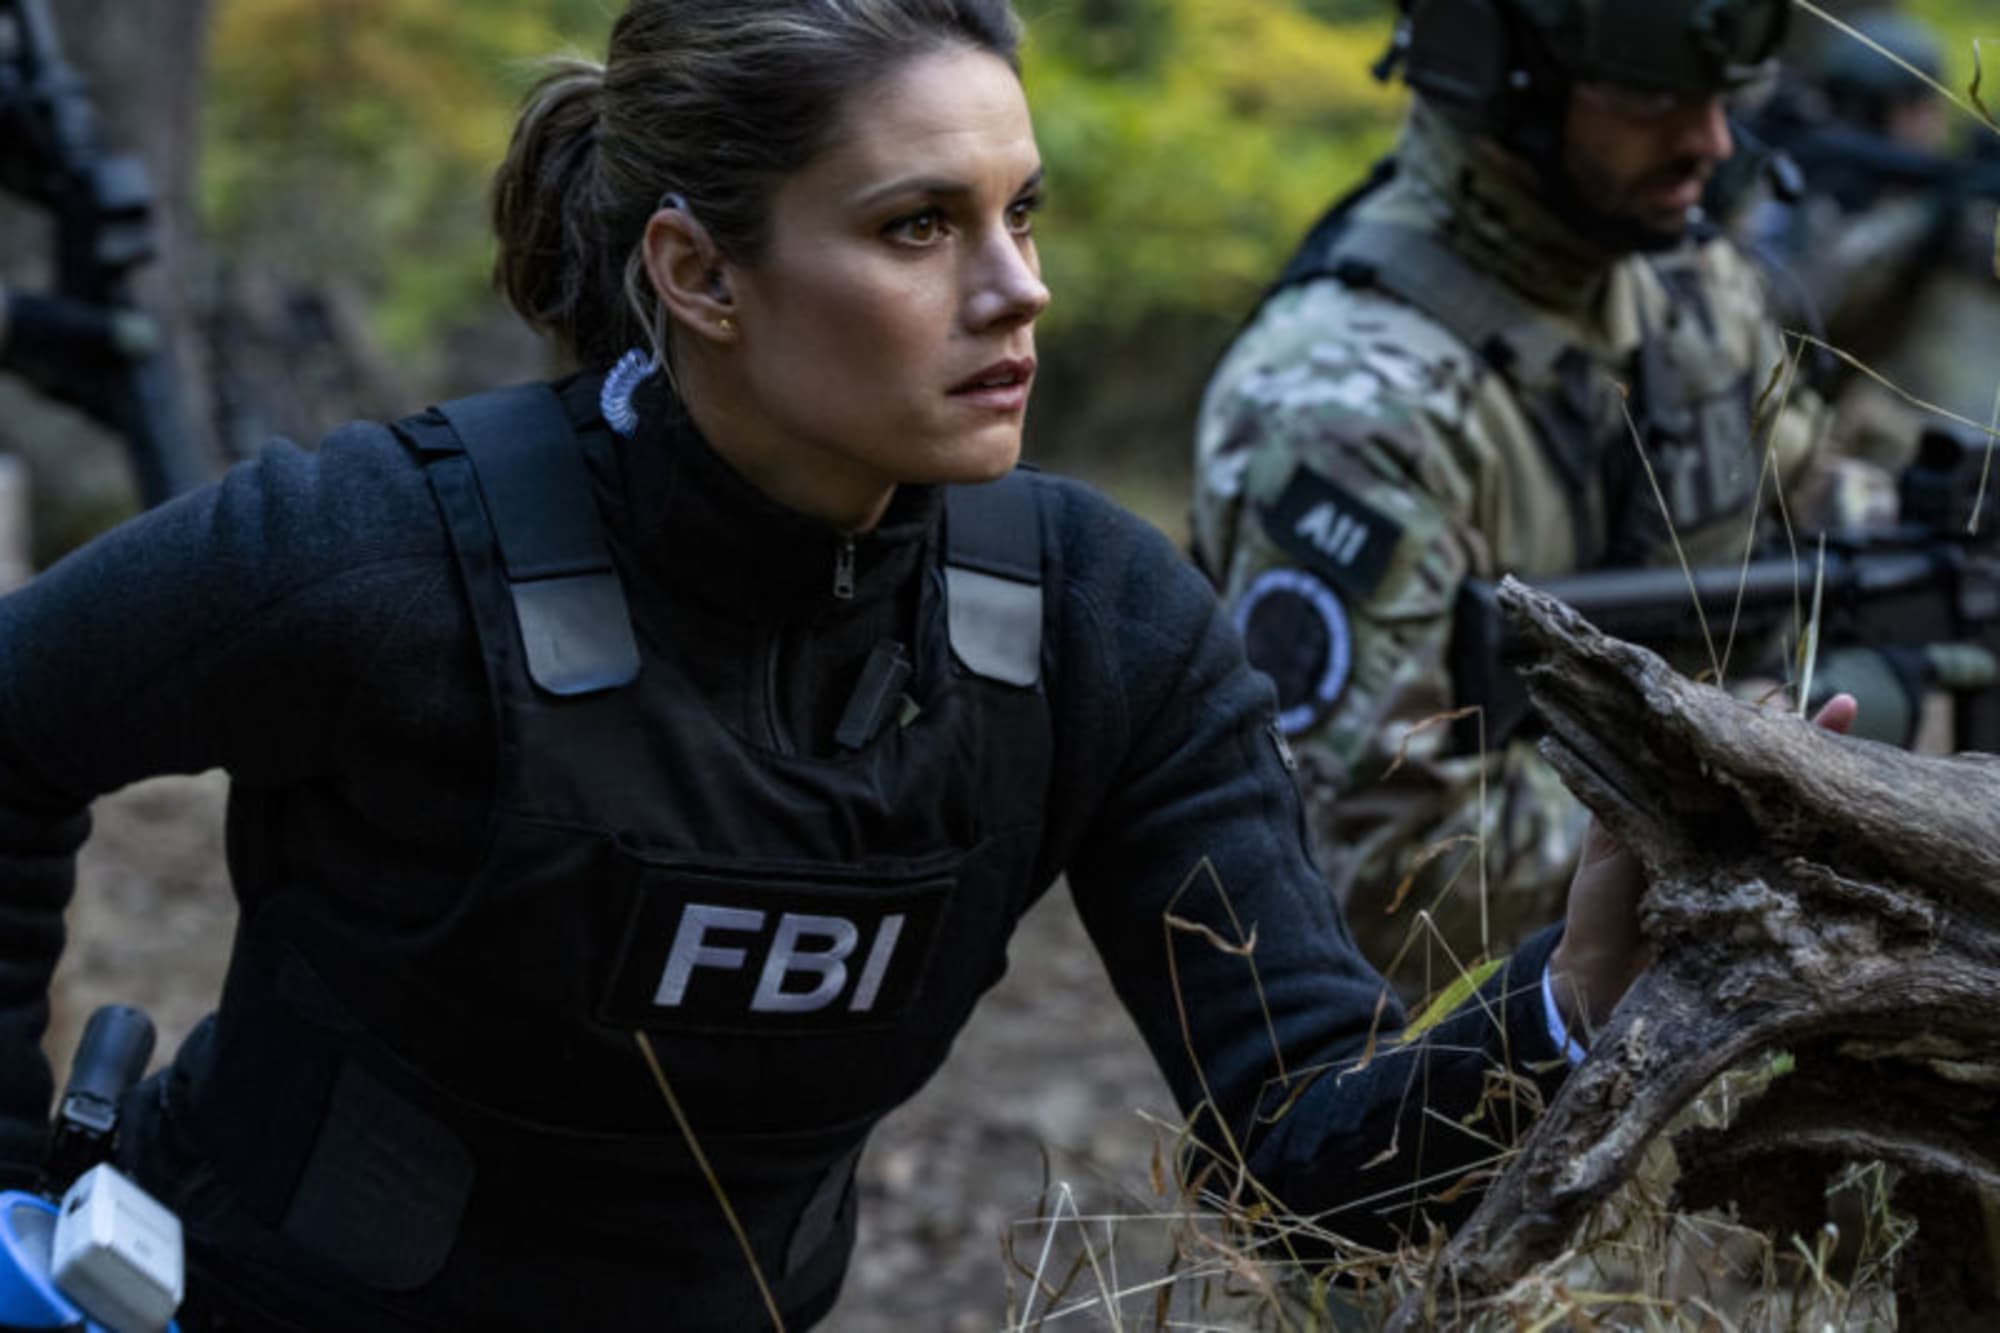 FBI season 1, episode 8 preview: This Land Is Your Land